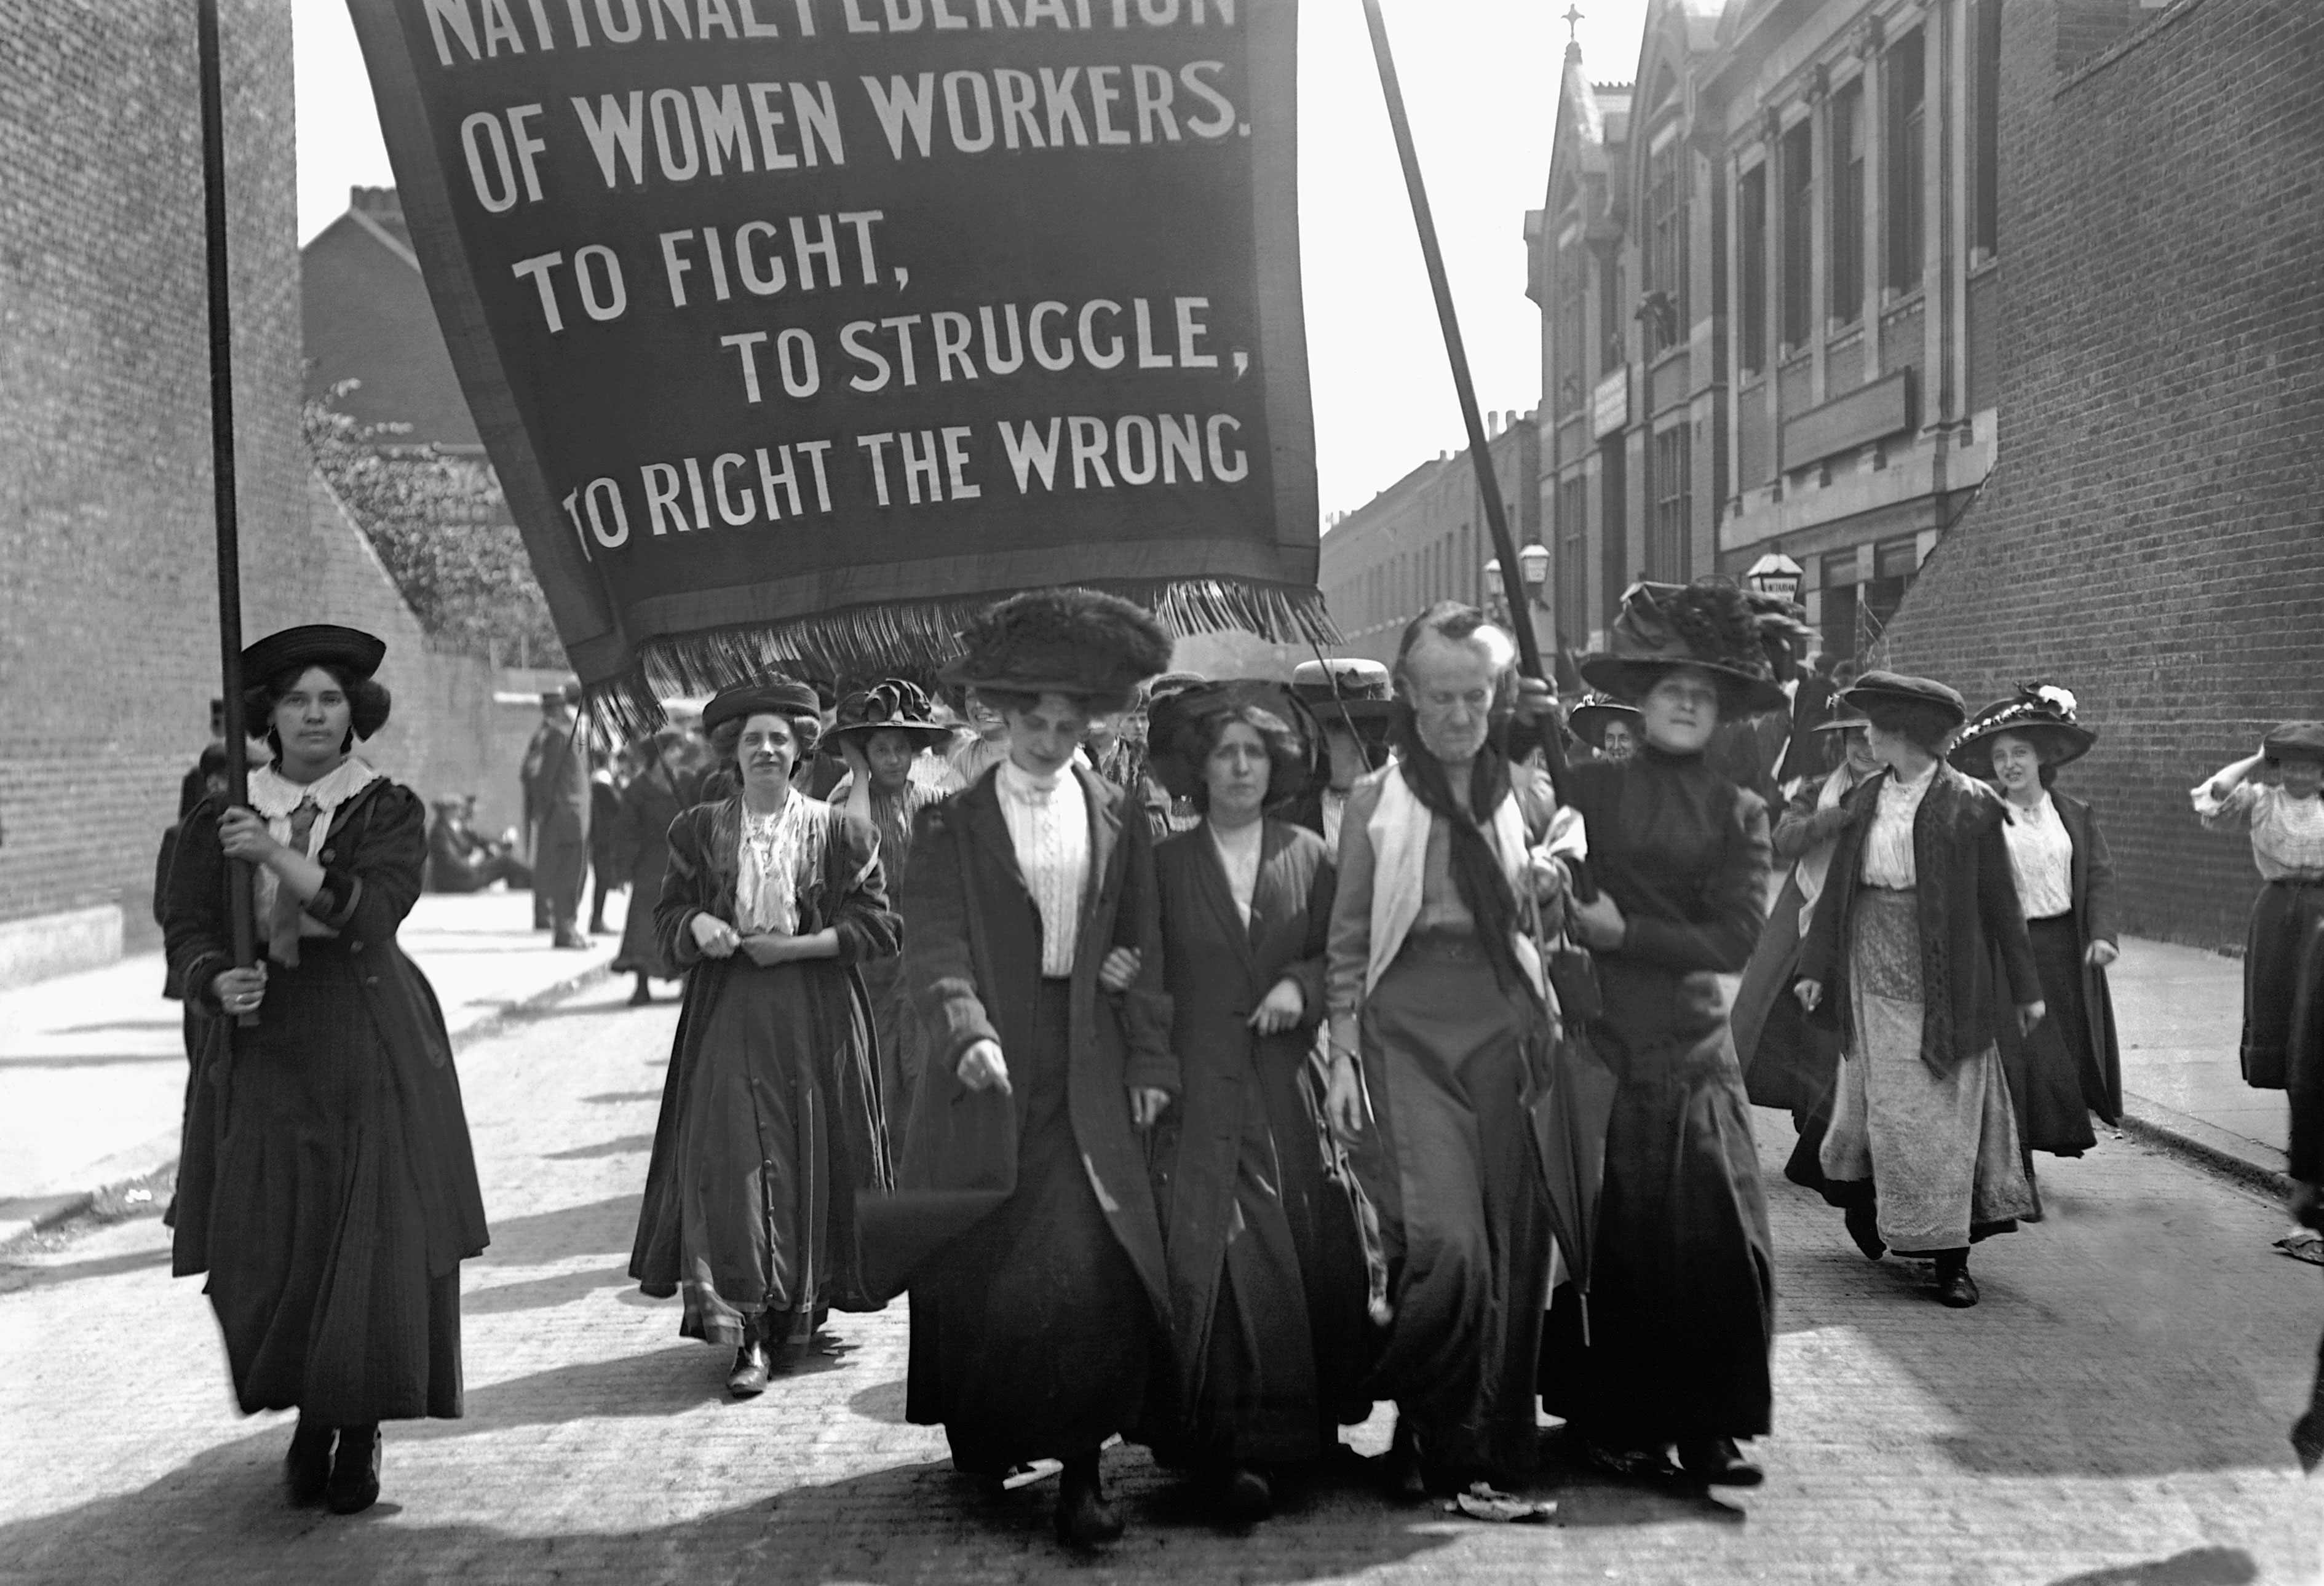 A suffragette march by the National Federation of Women Workers in London, 1911. Photo: Getty